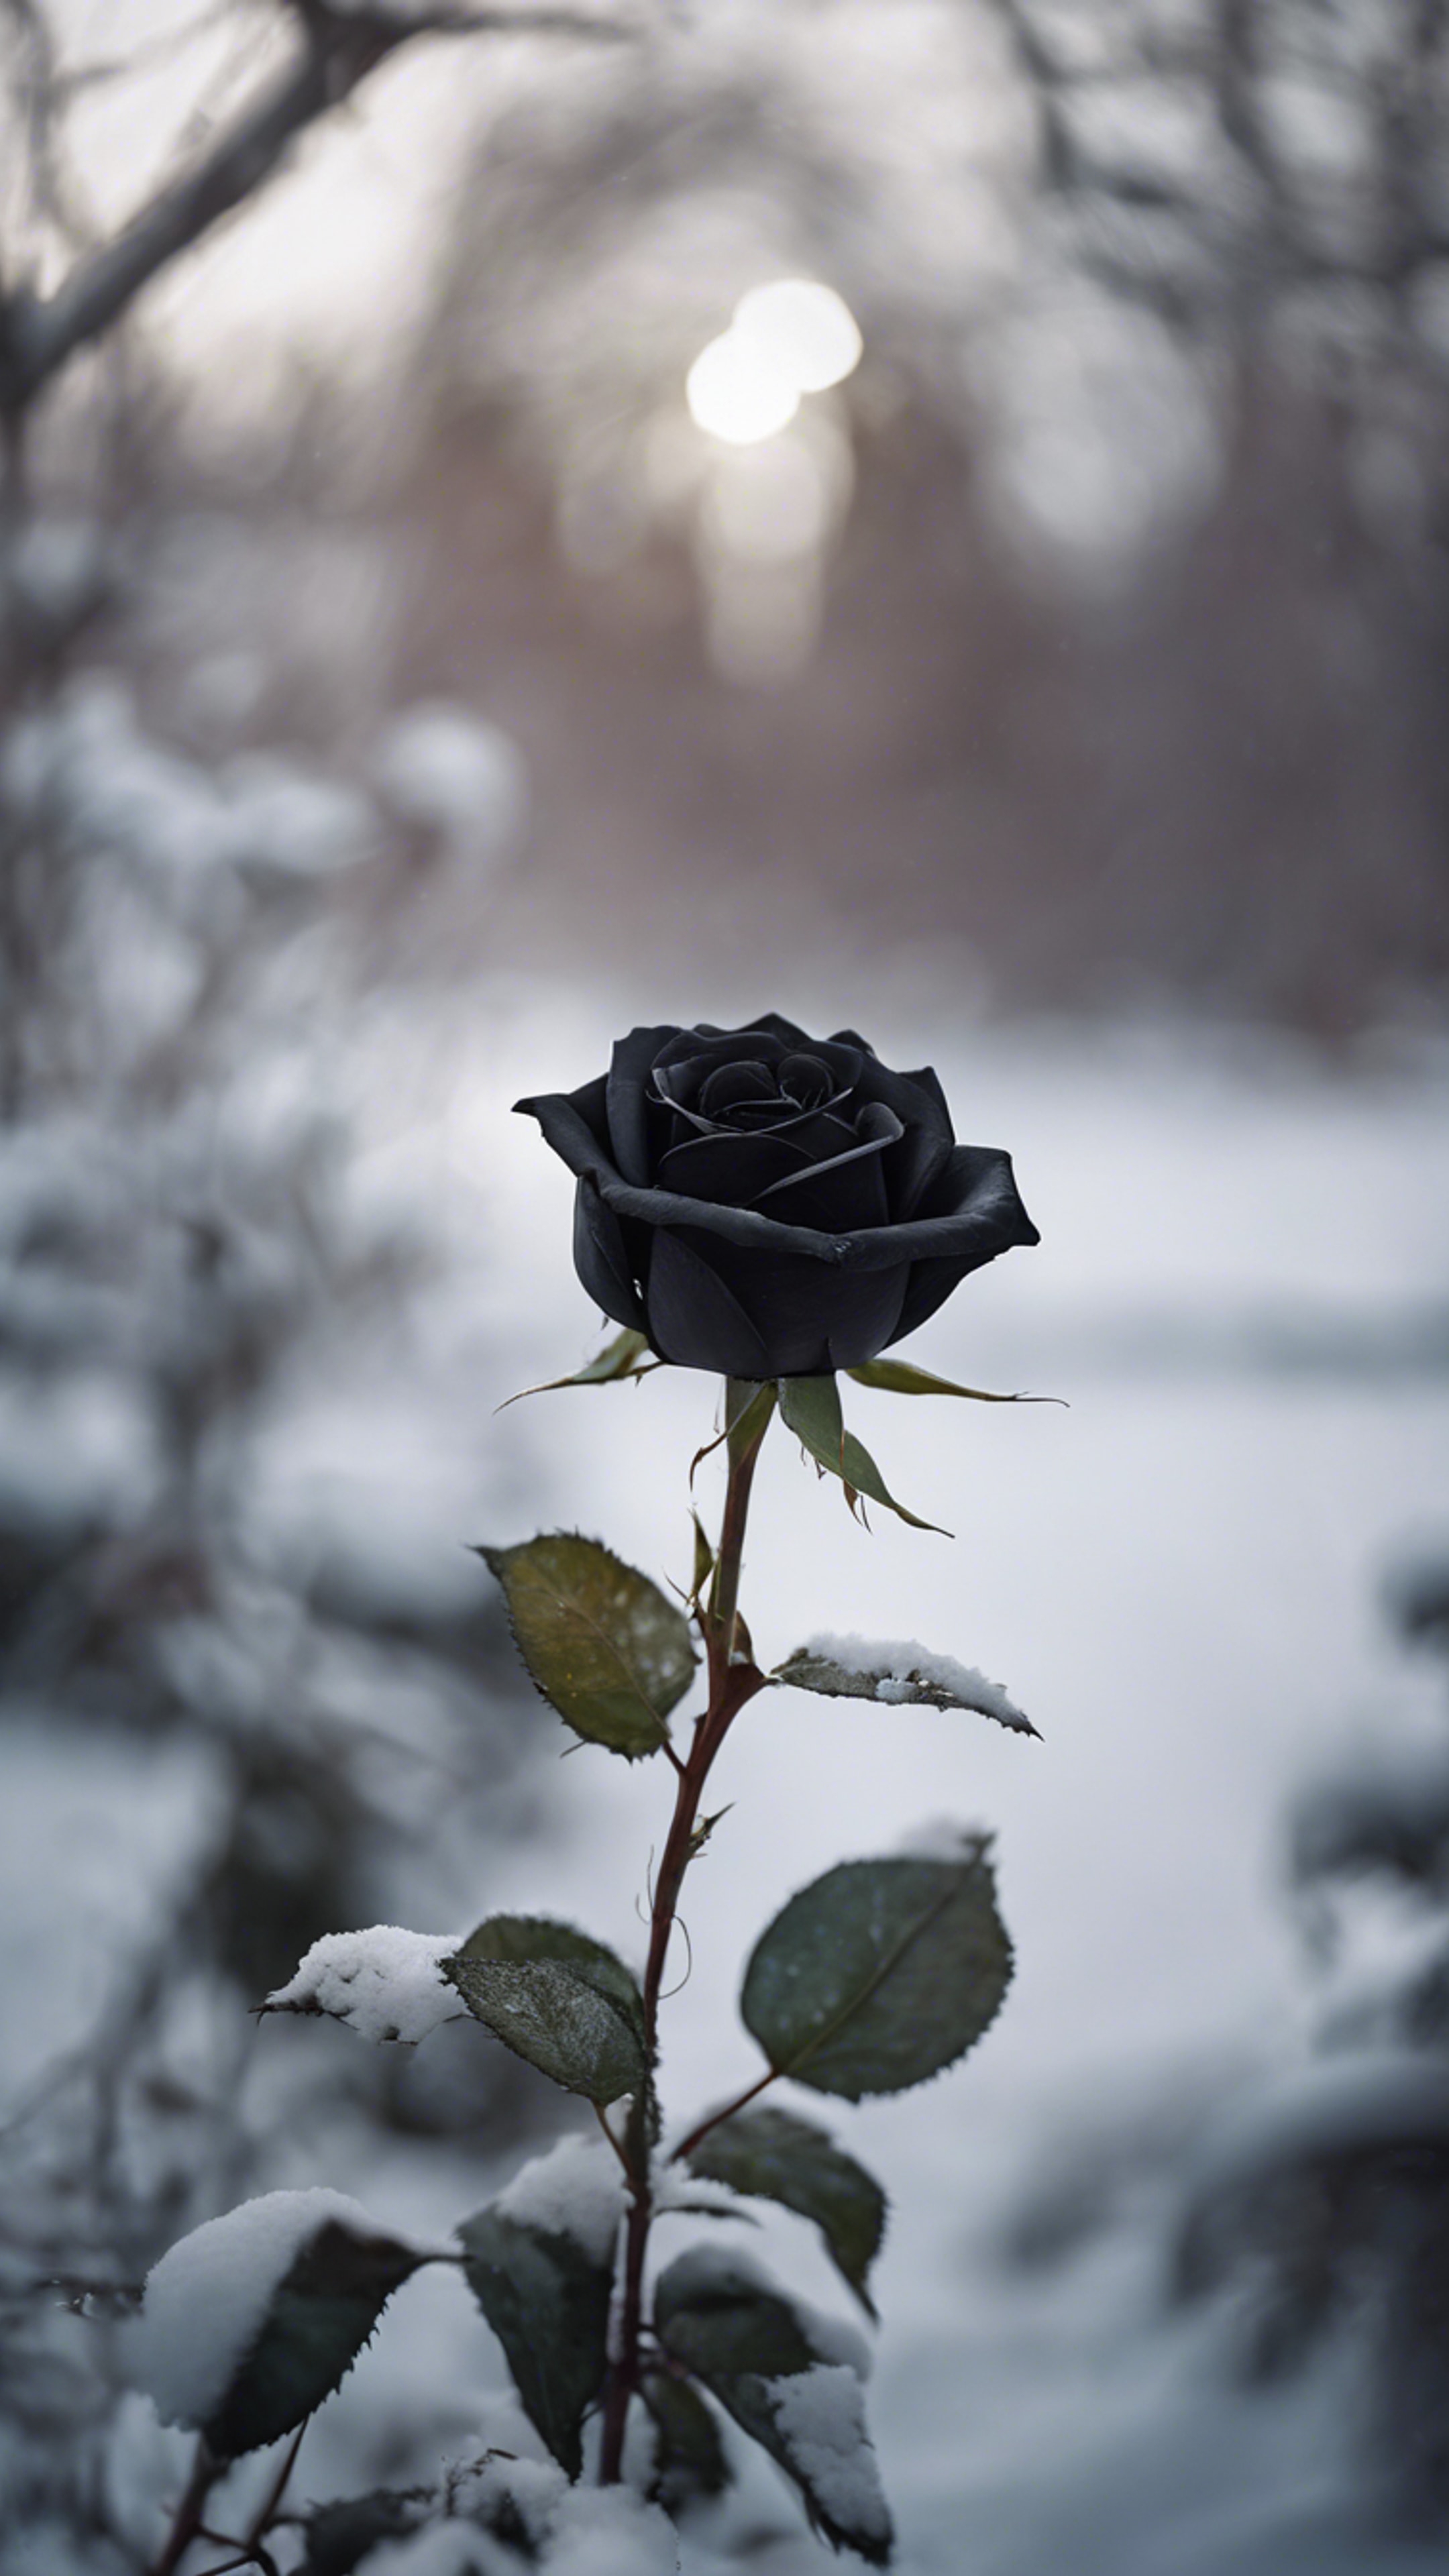 A single, dramatic black rose blooming against the stark backdrop of a snow-covered garden. Tapeta[12d80e94a68945fa833e]